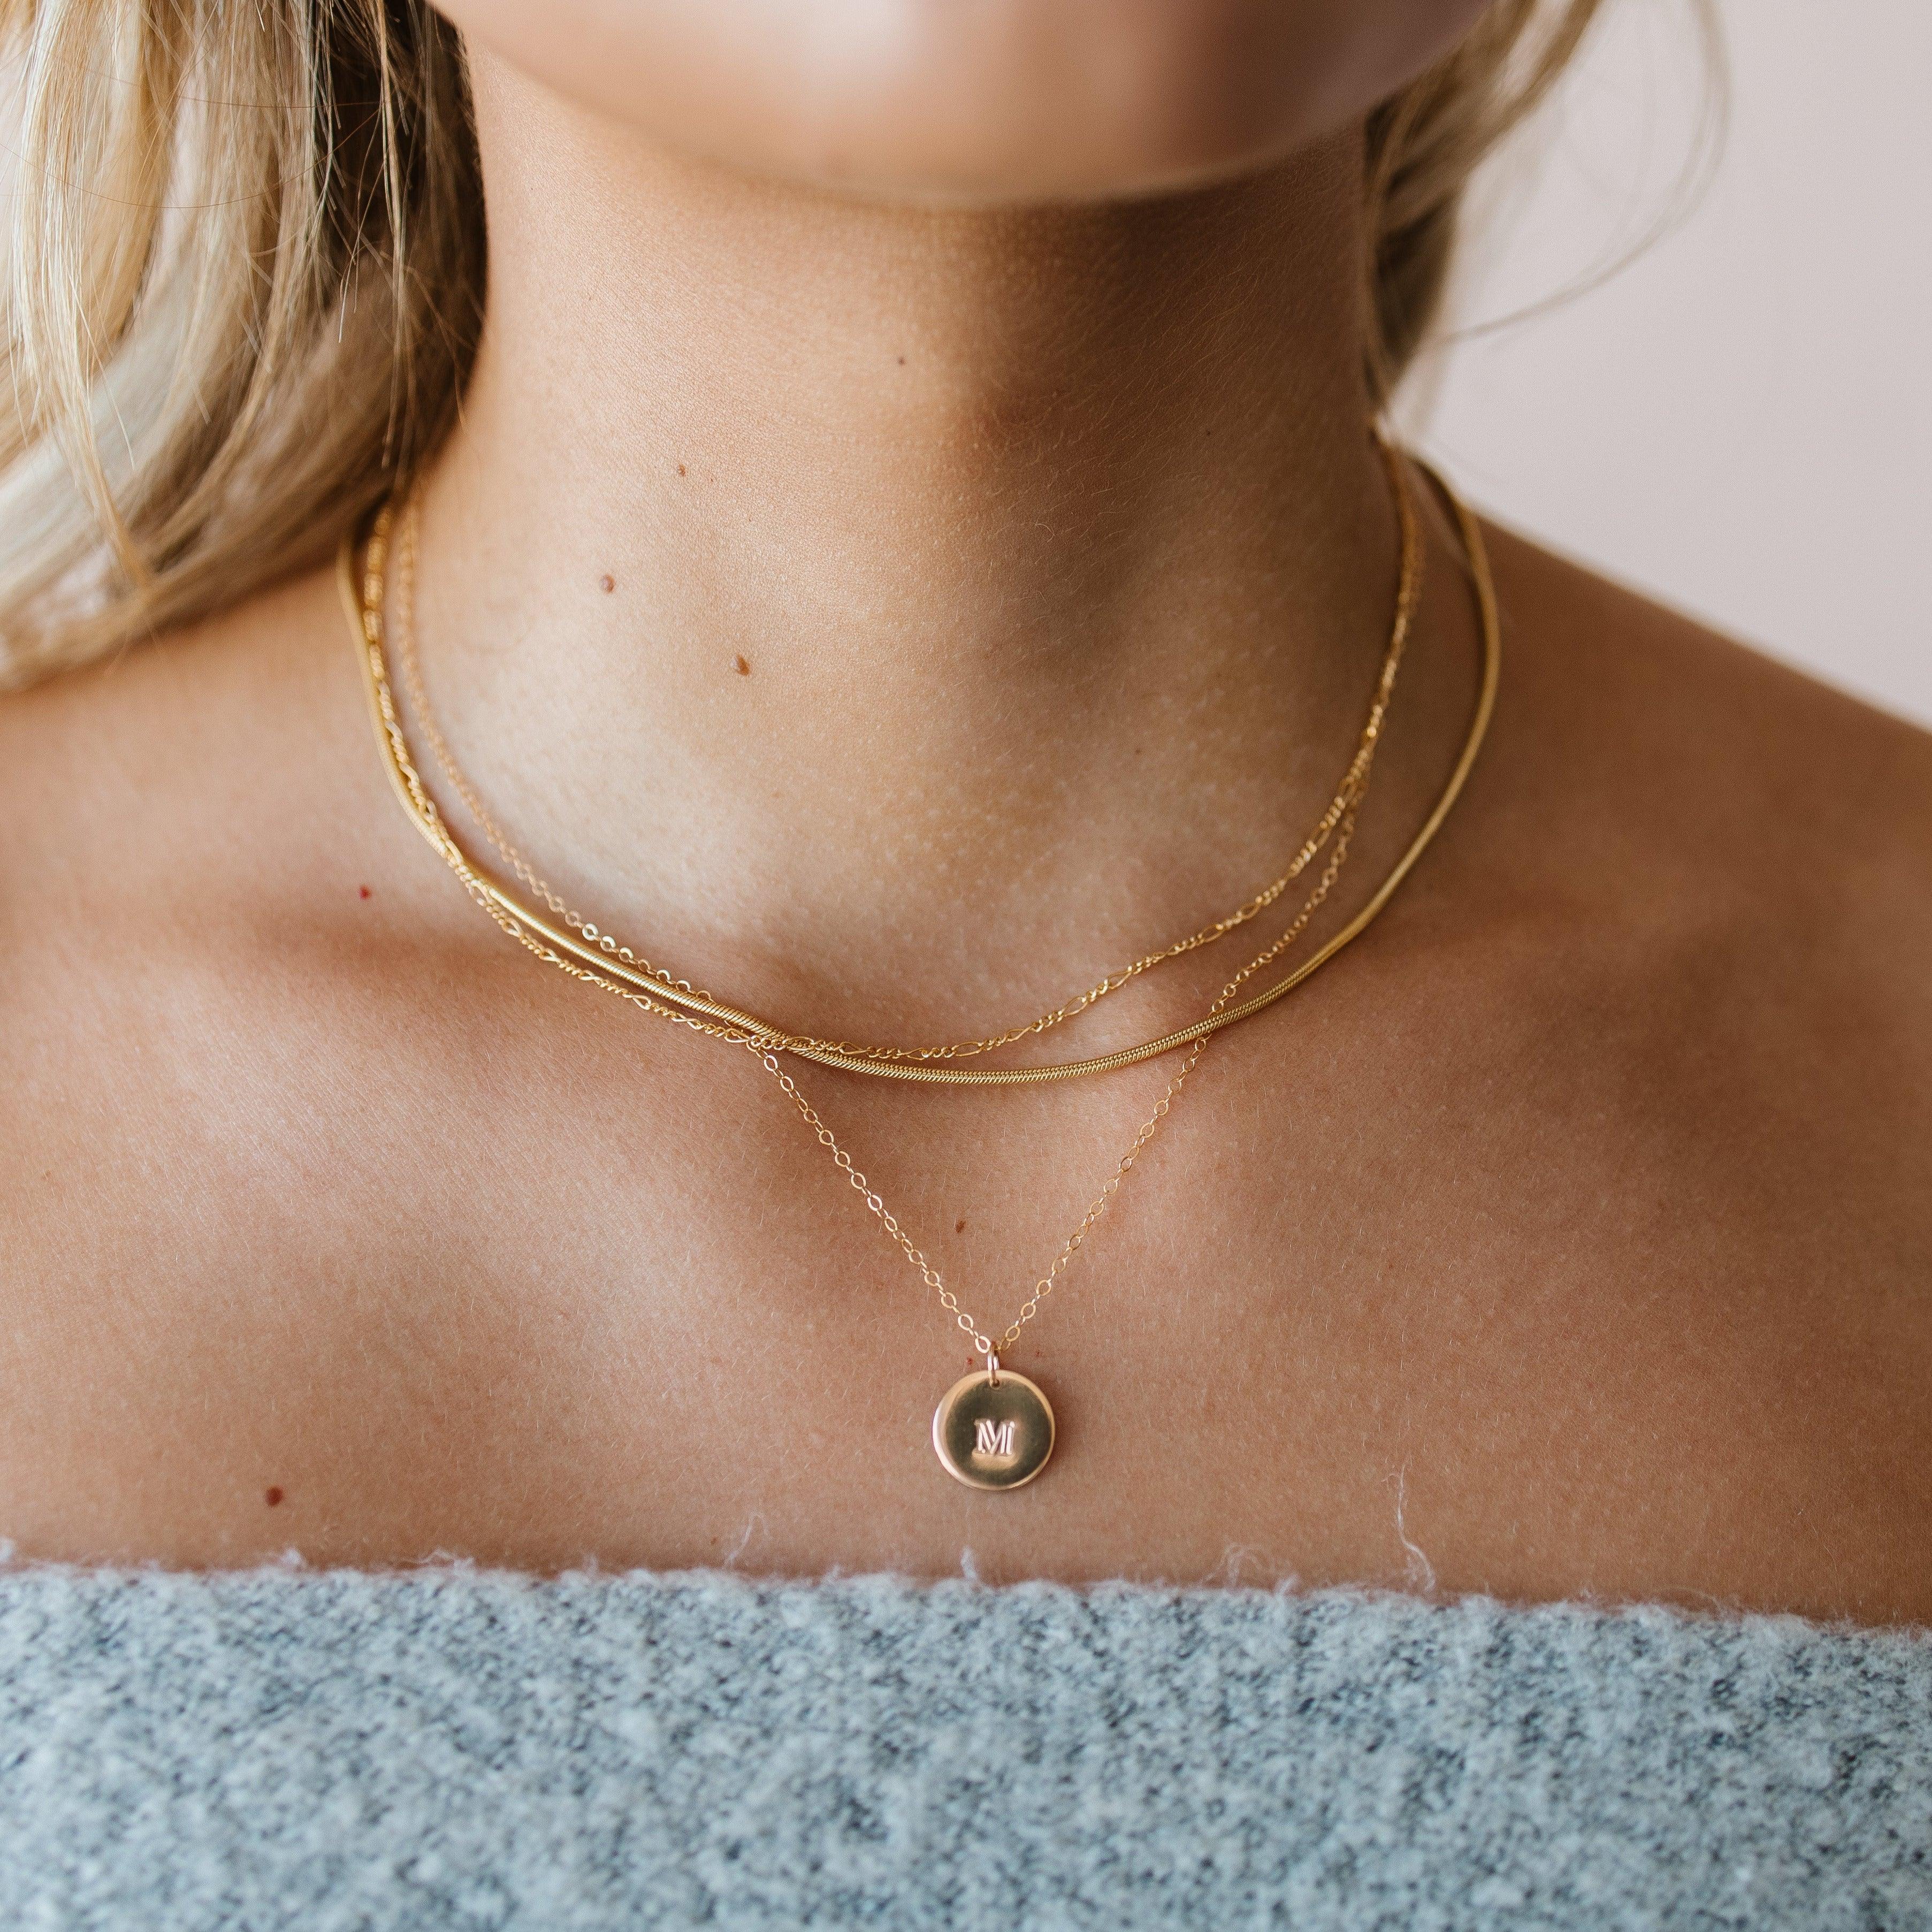 Cara Initial Necklace - Nolia Jewelry - Meaningful + Sustainably Handcrafted Jewelry